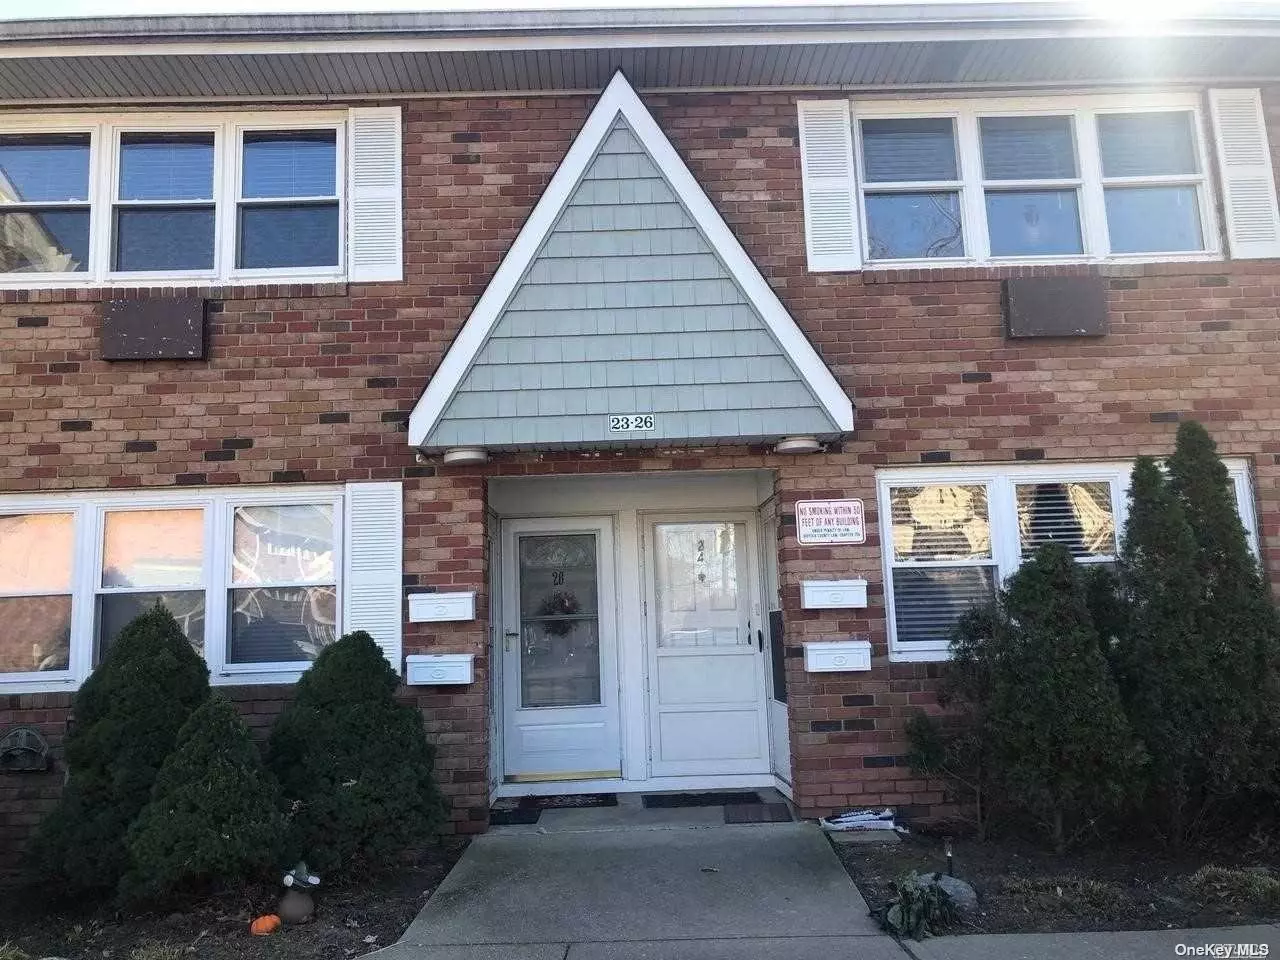 Mint 1 Bedroom Airy Second Floor Co-Op, Remodeled Full Bathroom-new Double Sink vanity, New Floors, Freshly Painted, Large sliding Barn Door, Crown Moulding, Lots of Closets, Storage Unit.Washer& Dryer on Premises.Monthly fee& Taxes with basic Star only $539.92!!